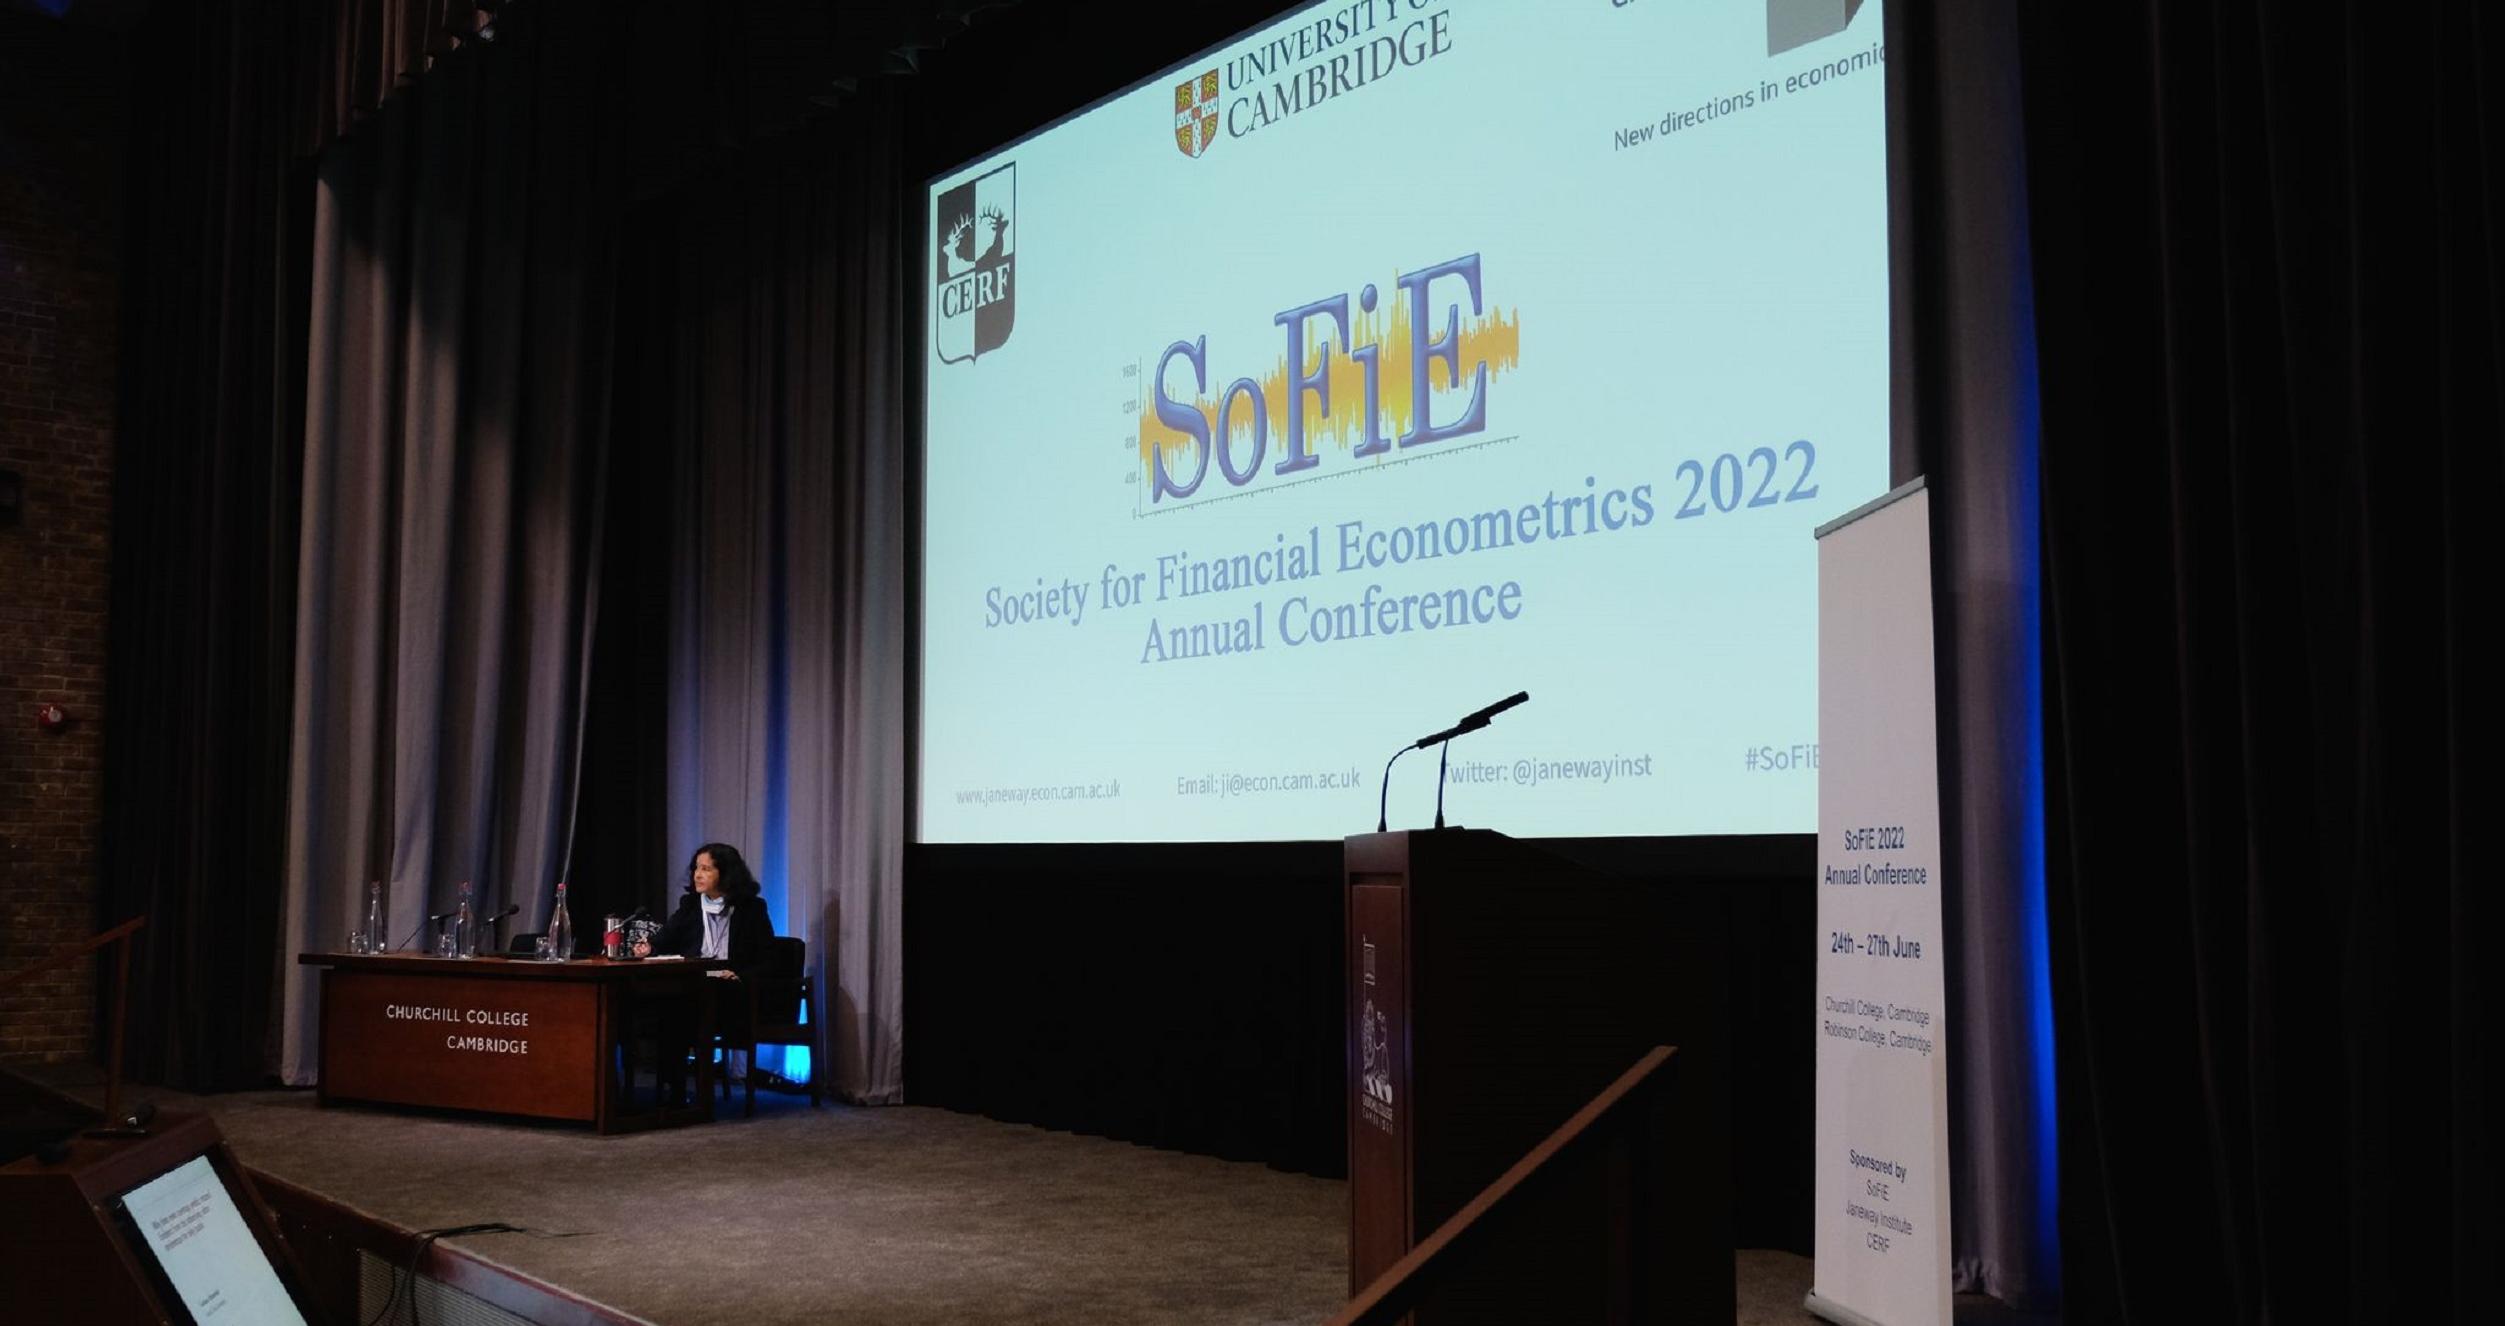 Image of SoFiE Conference stage